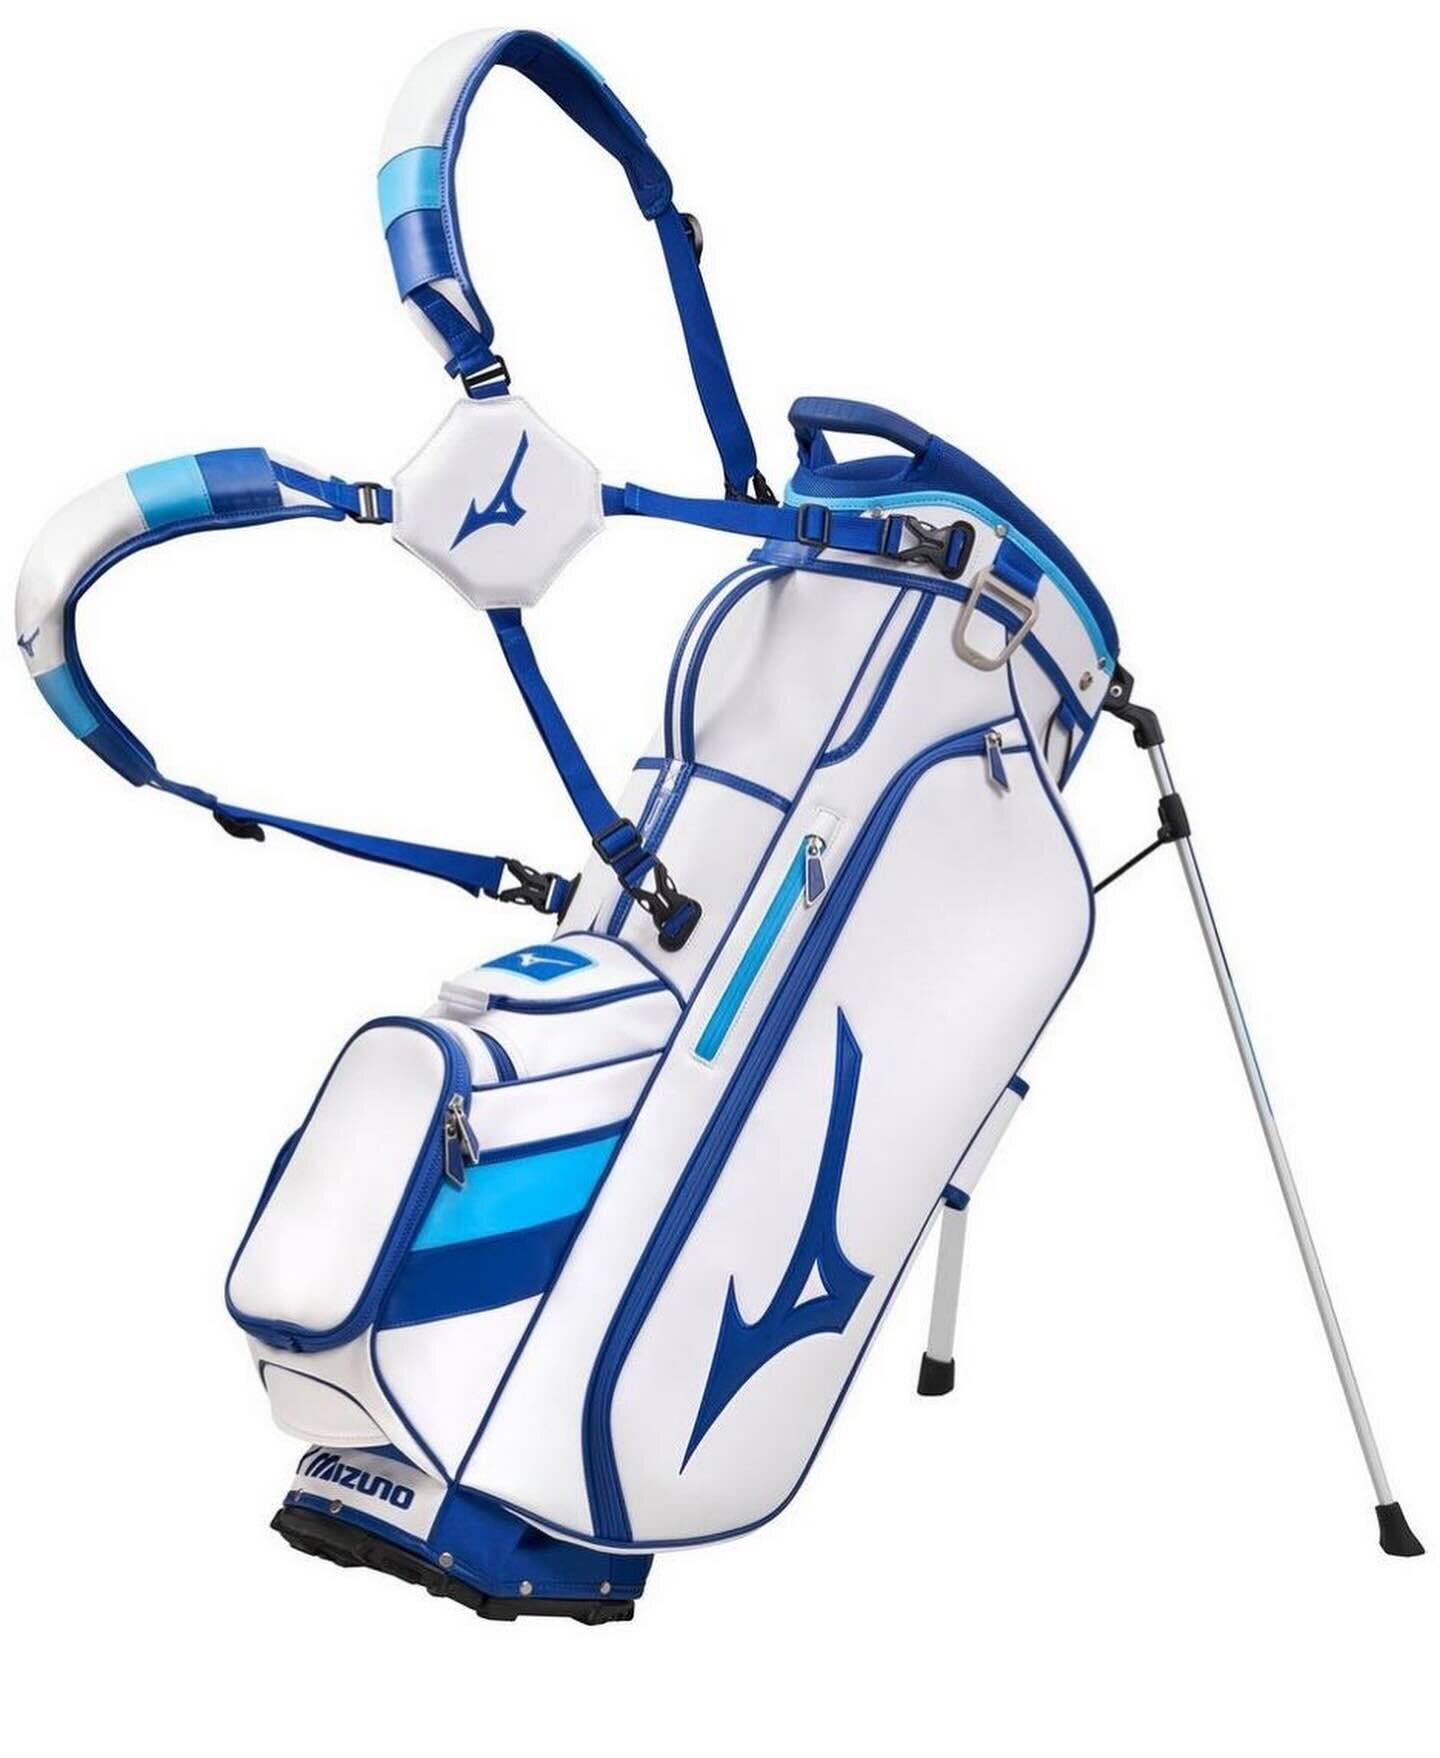 New to the Pro Shop on our website! Purchase this Tour 14 Way Stand Golf Bag, and chose to pick up or have it shipped to you.